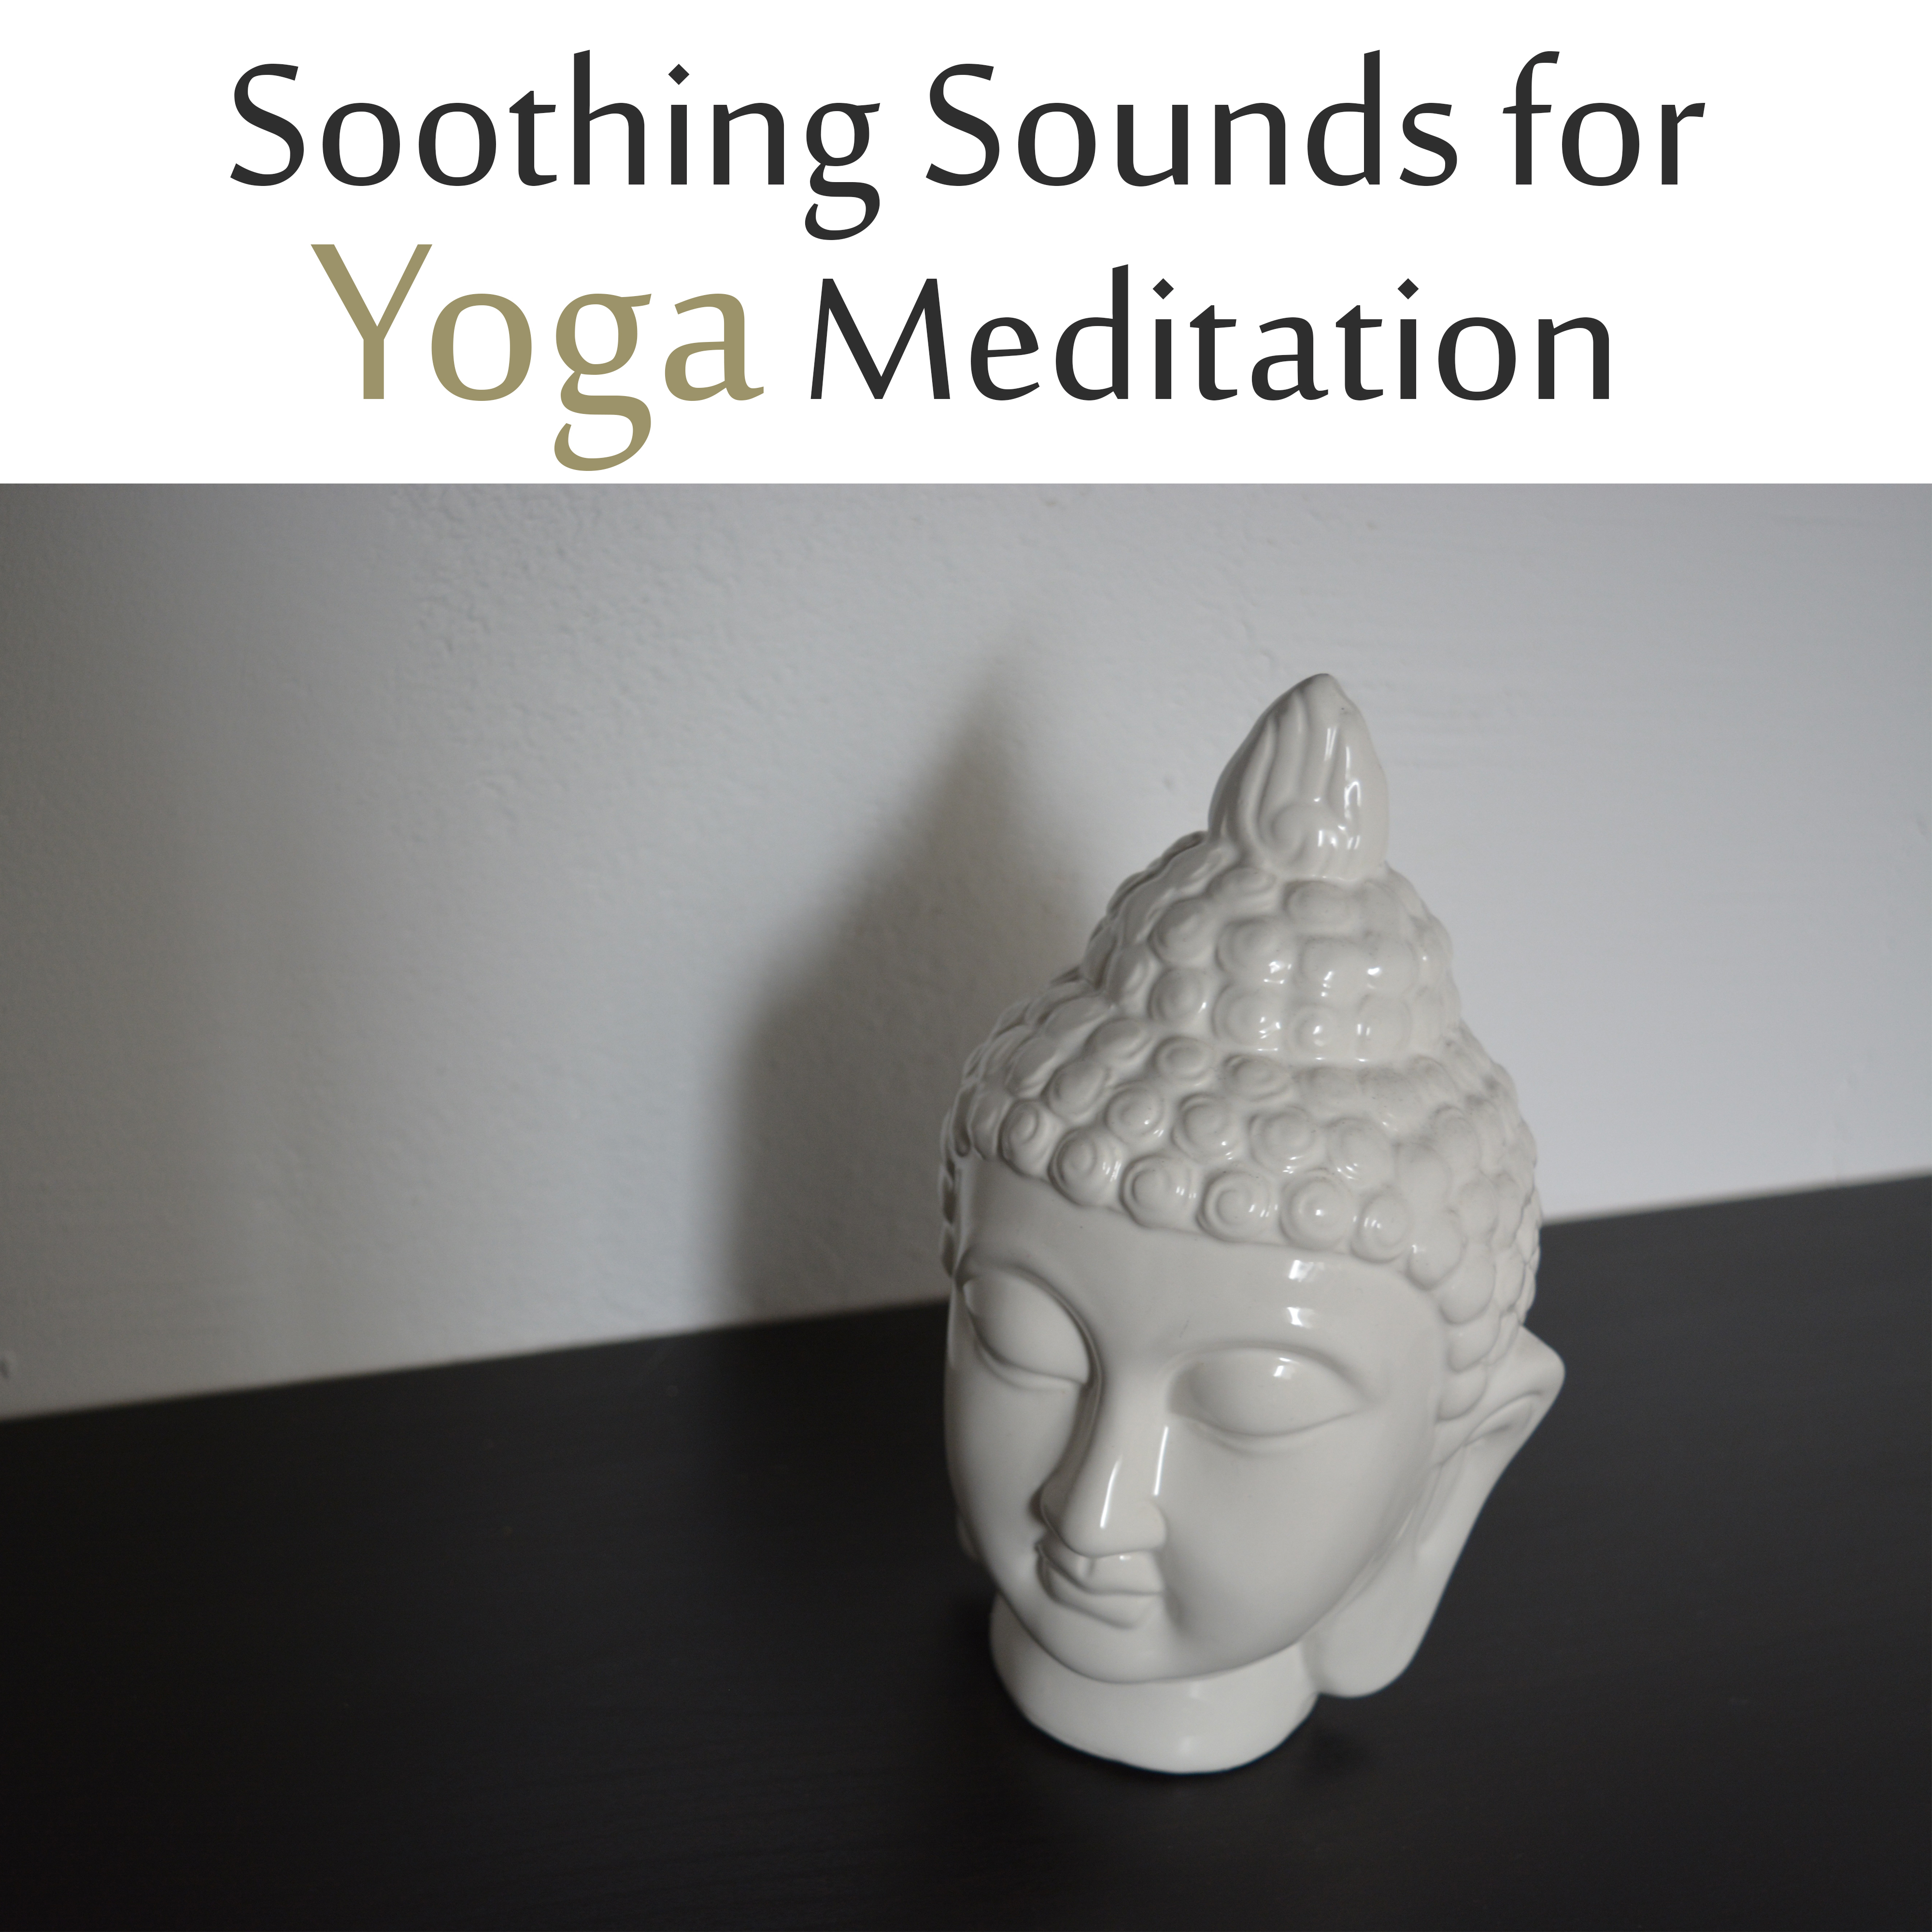 Soothing Sounds for Yoga Meditation – Easy Listening, Meditation Sounds for Mind Calmness, Inner Journey, Soft New Age Melodies